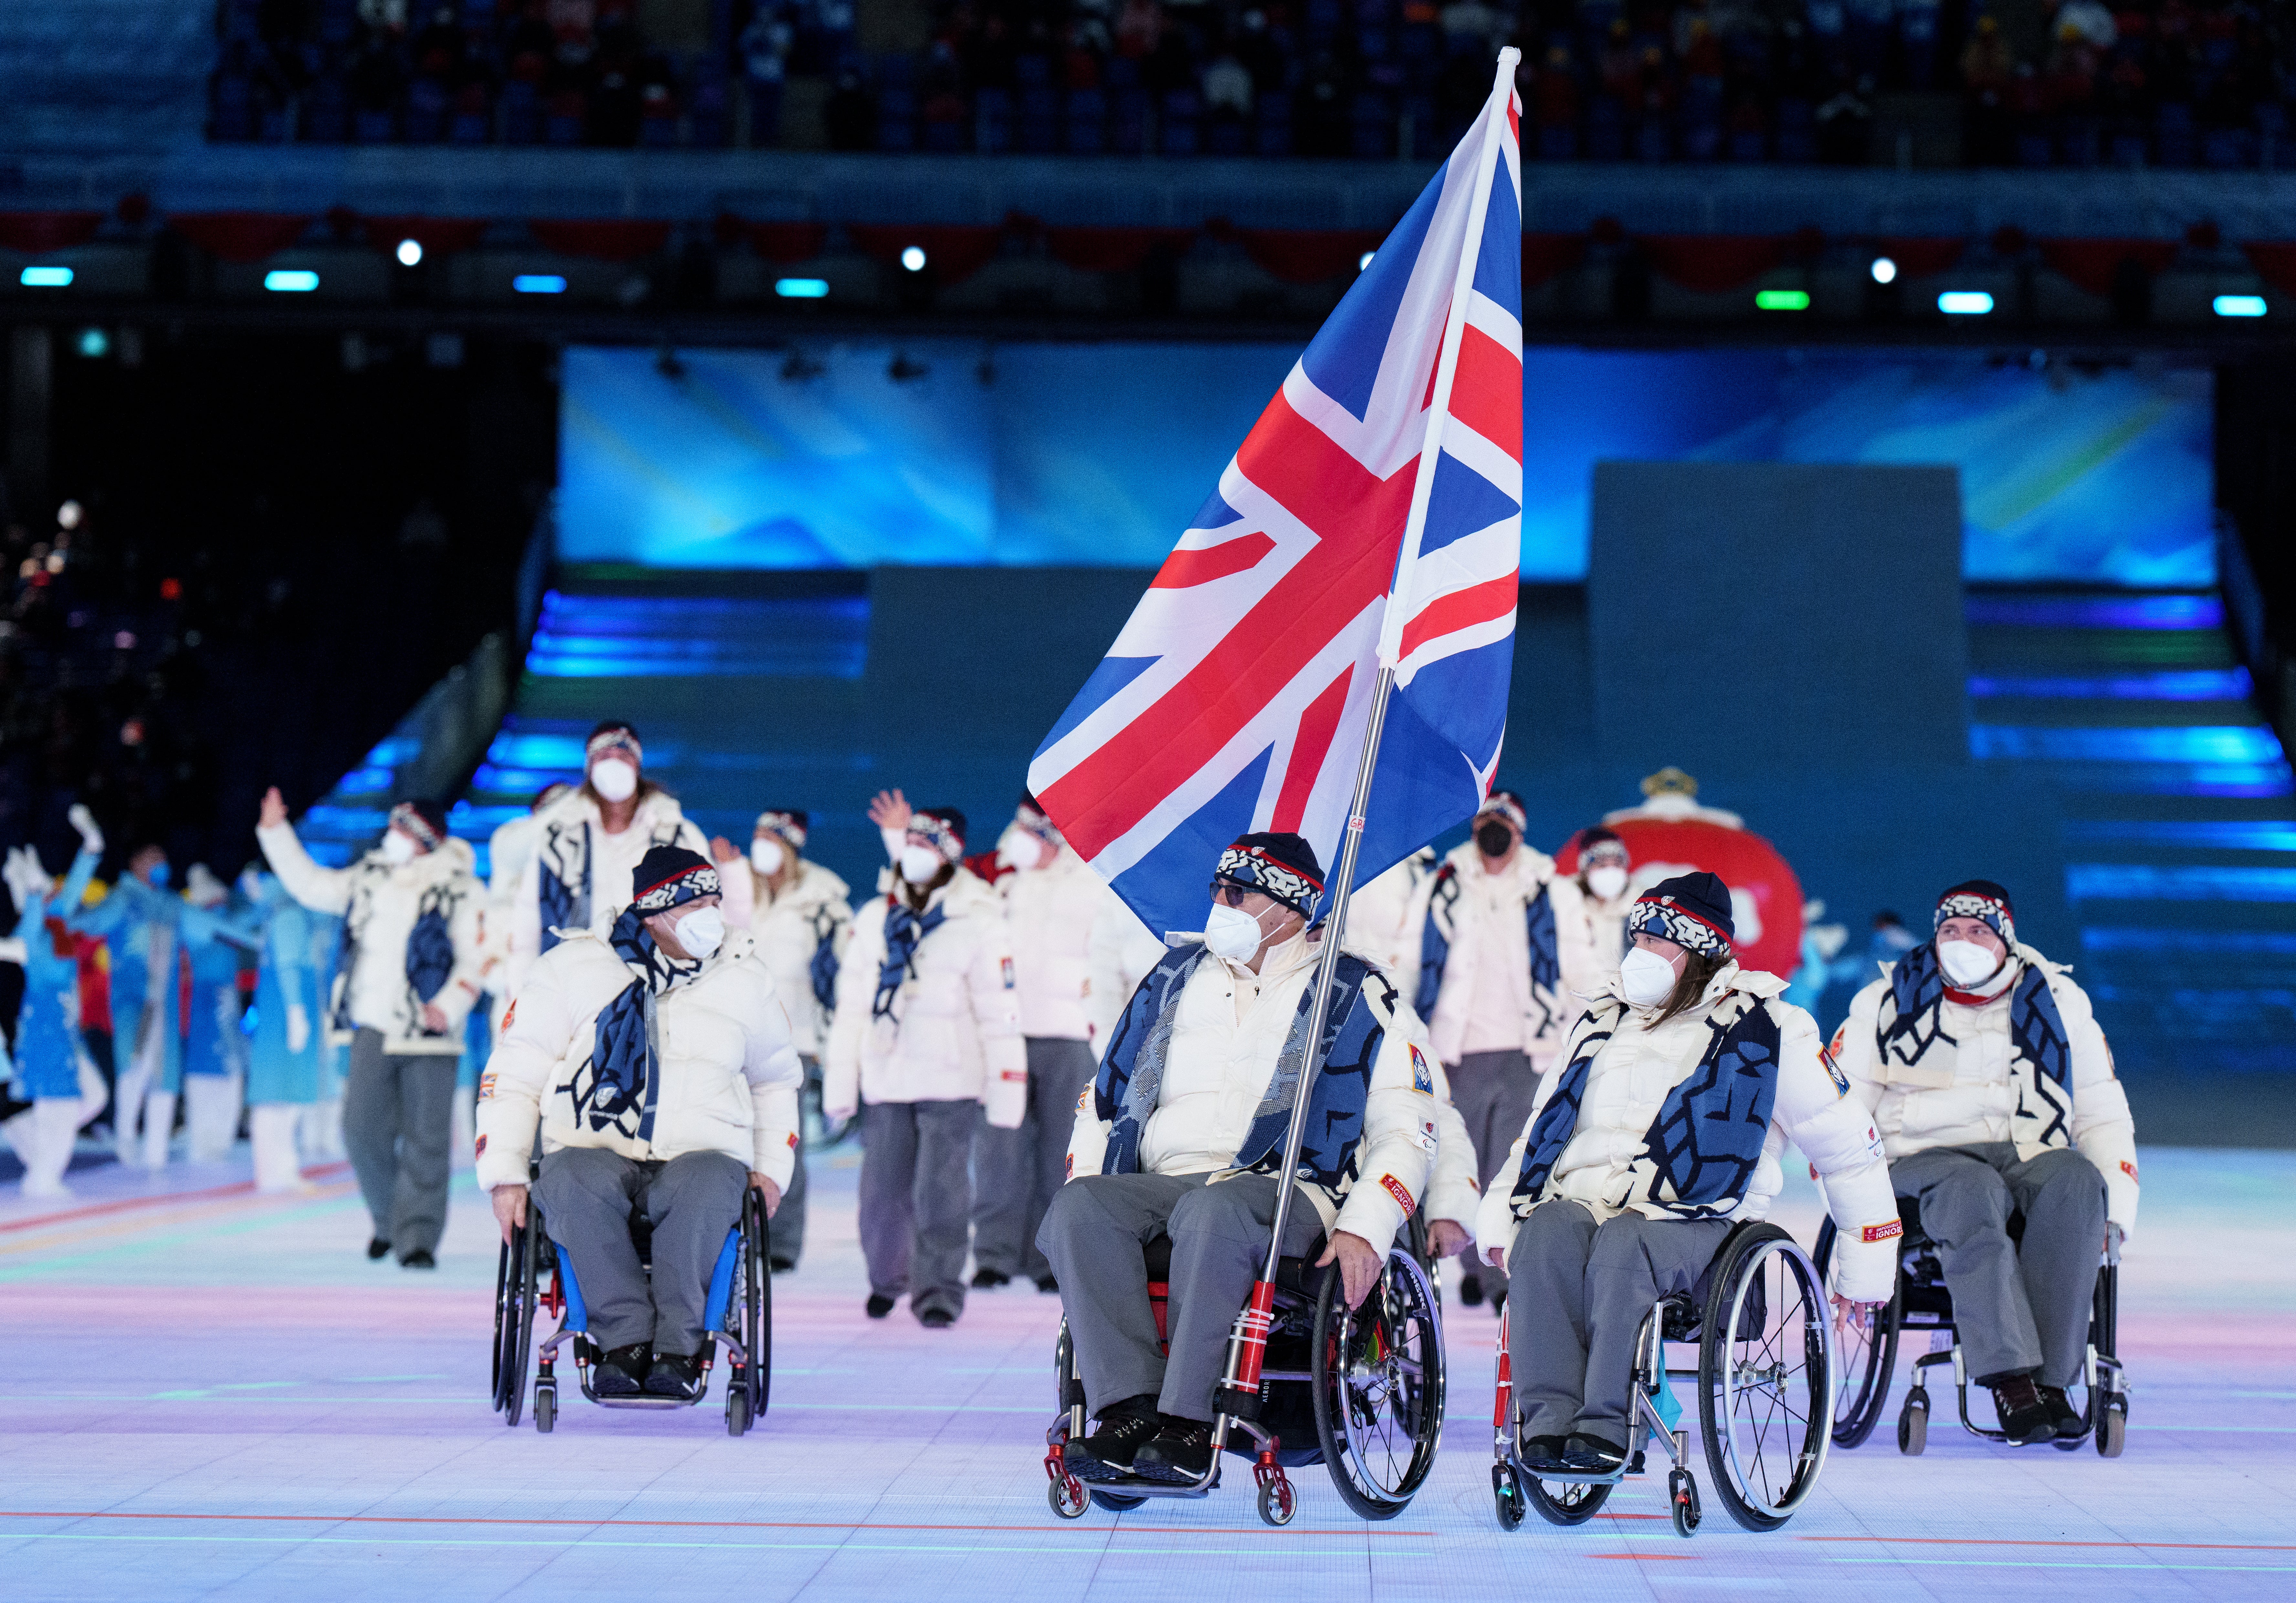 Wheelchair curlers Meggan Dawson-Farrell and Gregor Ewan carried the flag for the Great Britain Paralympic team during the athlete parade in Beijing (Joe Toth for OIS/PA)